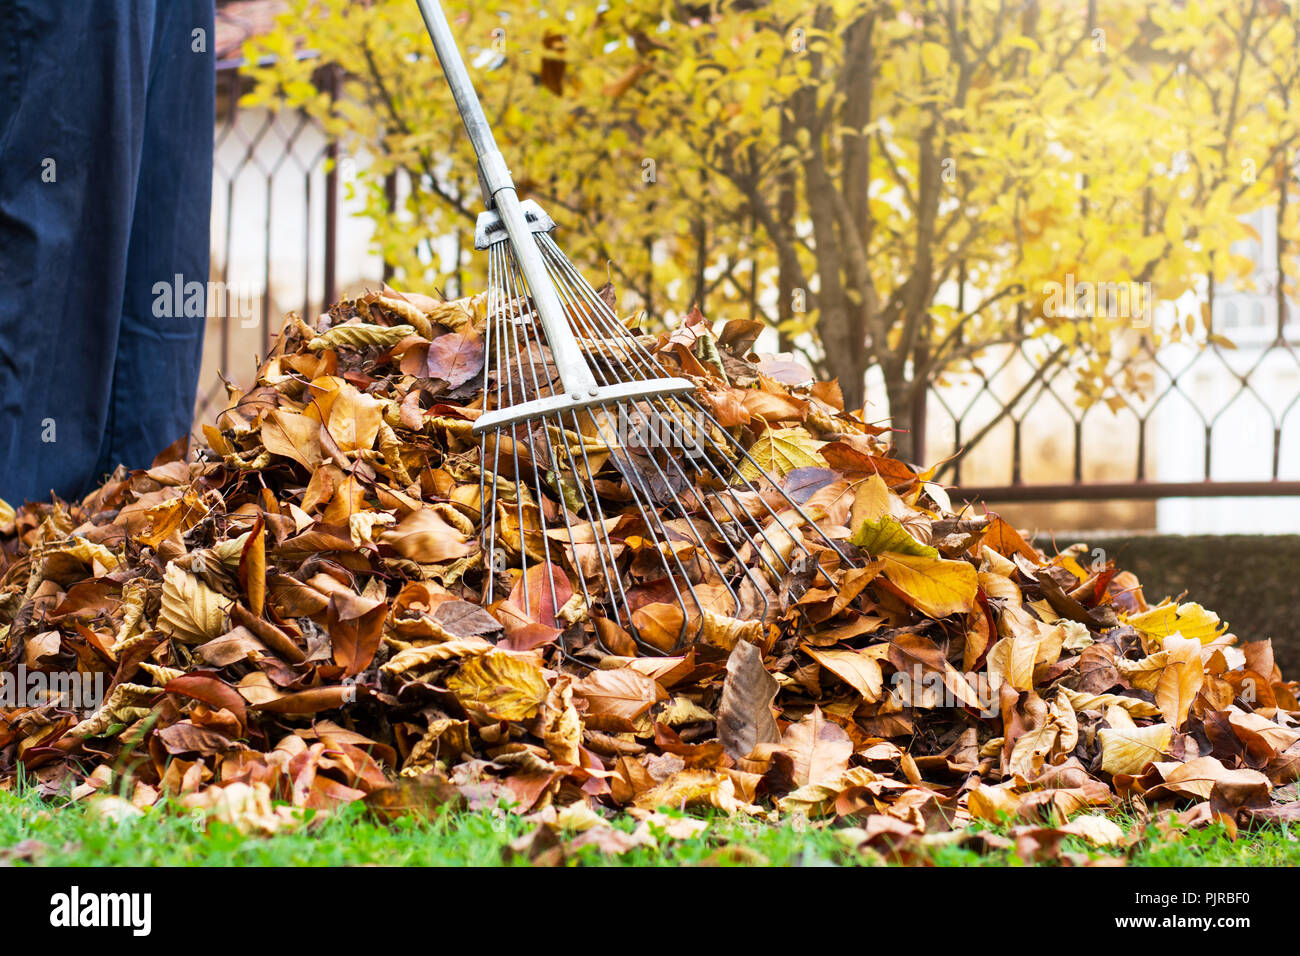 Man collecting fallen autumn leaves in the yard first person view Stock Photo